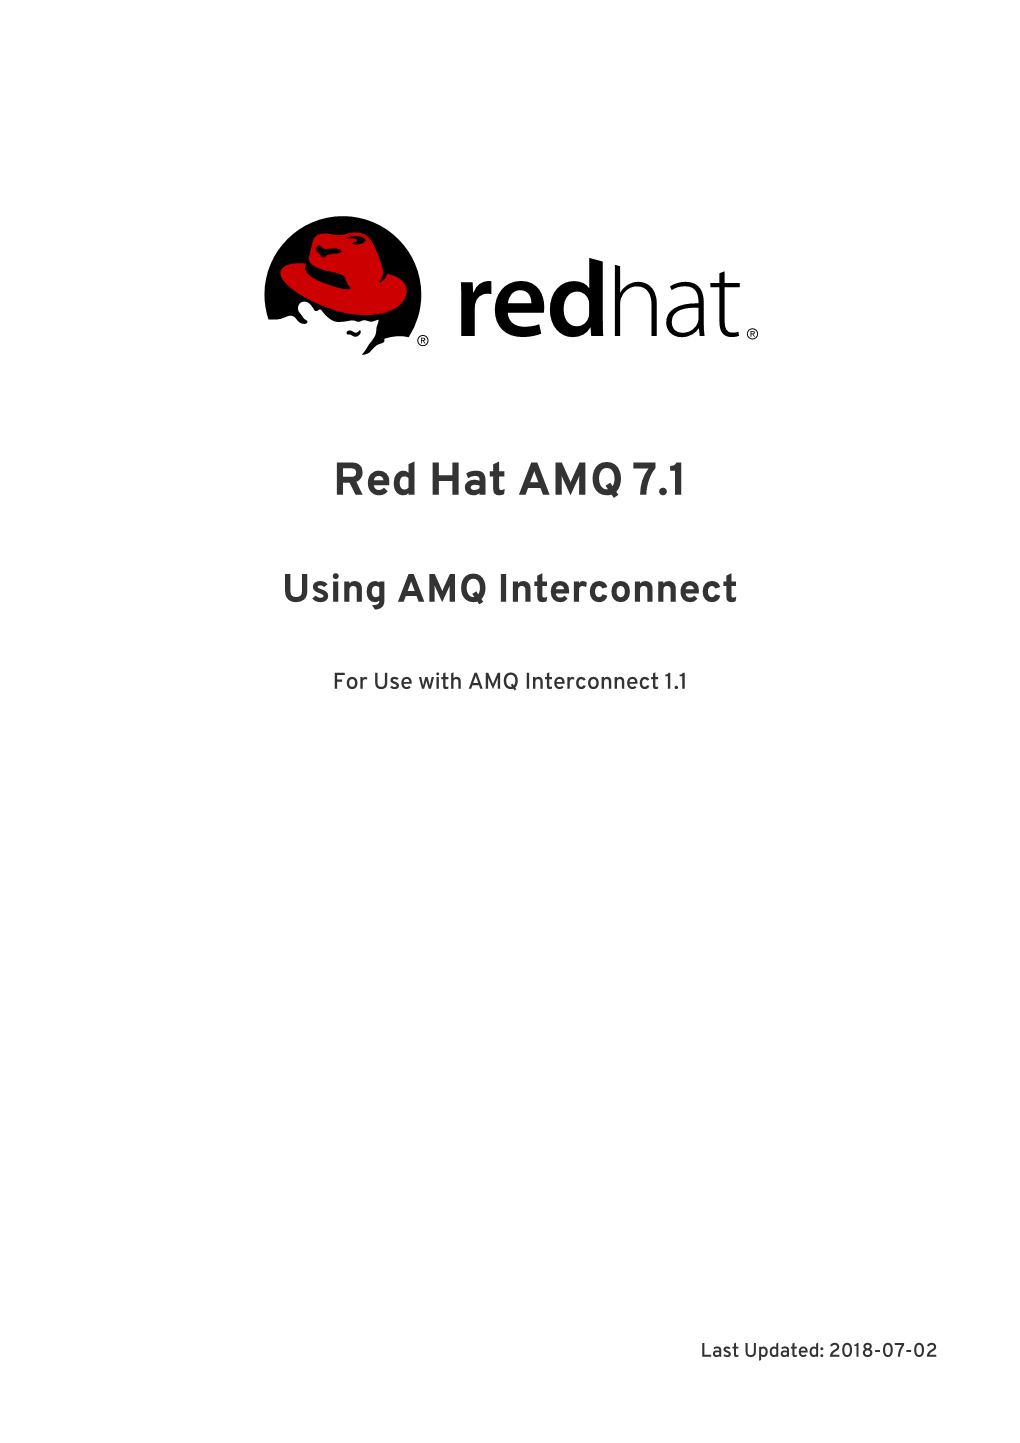 Red Hat AMQ 7.1 Using AMQ Interconnect